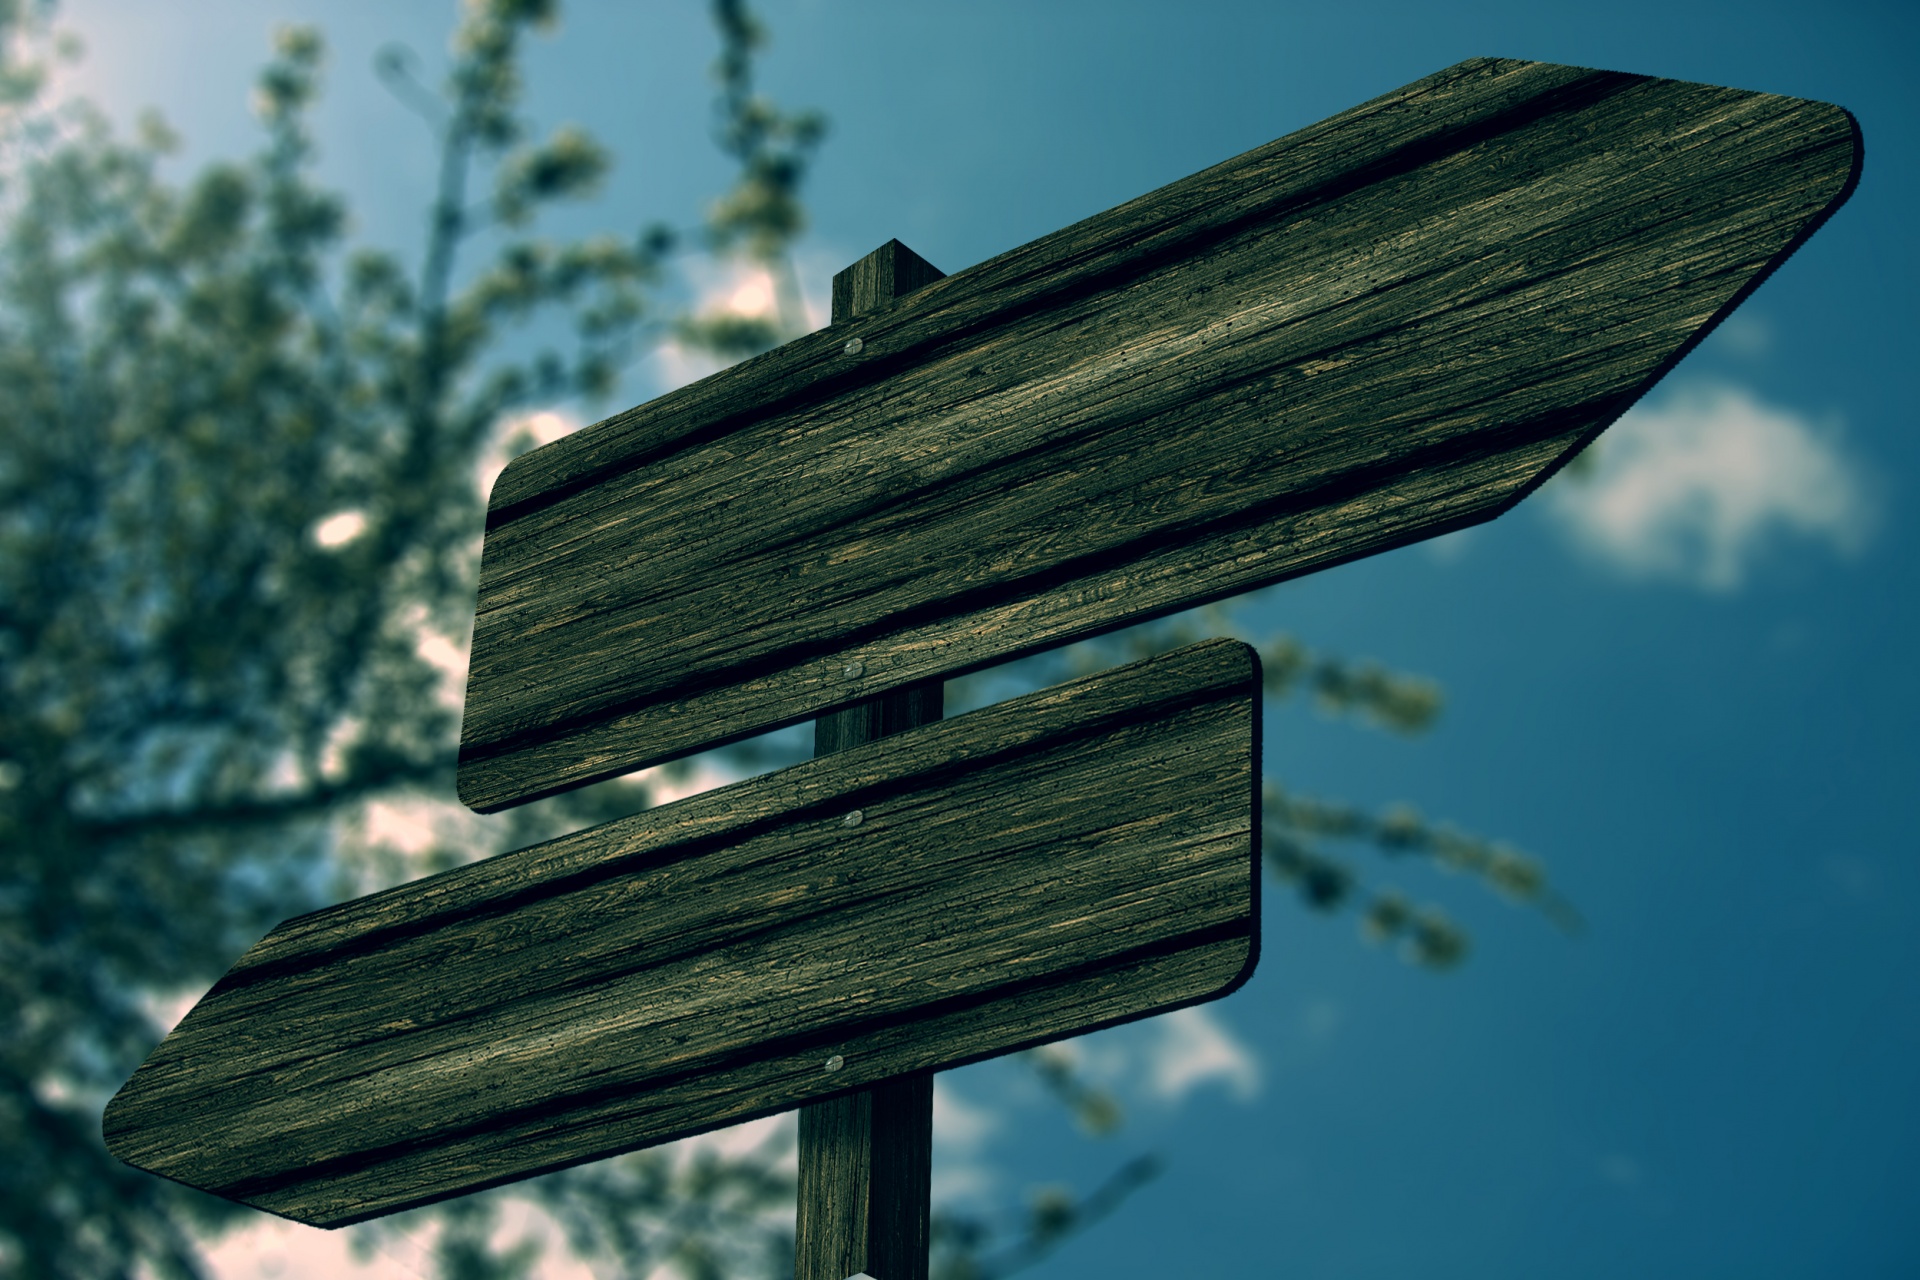 Unlabeled Signposts